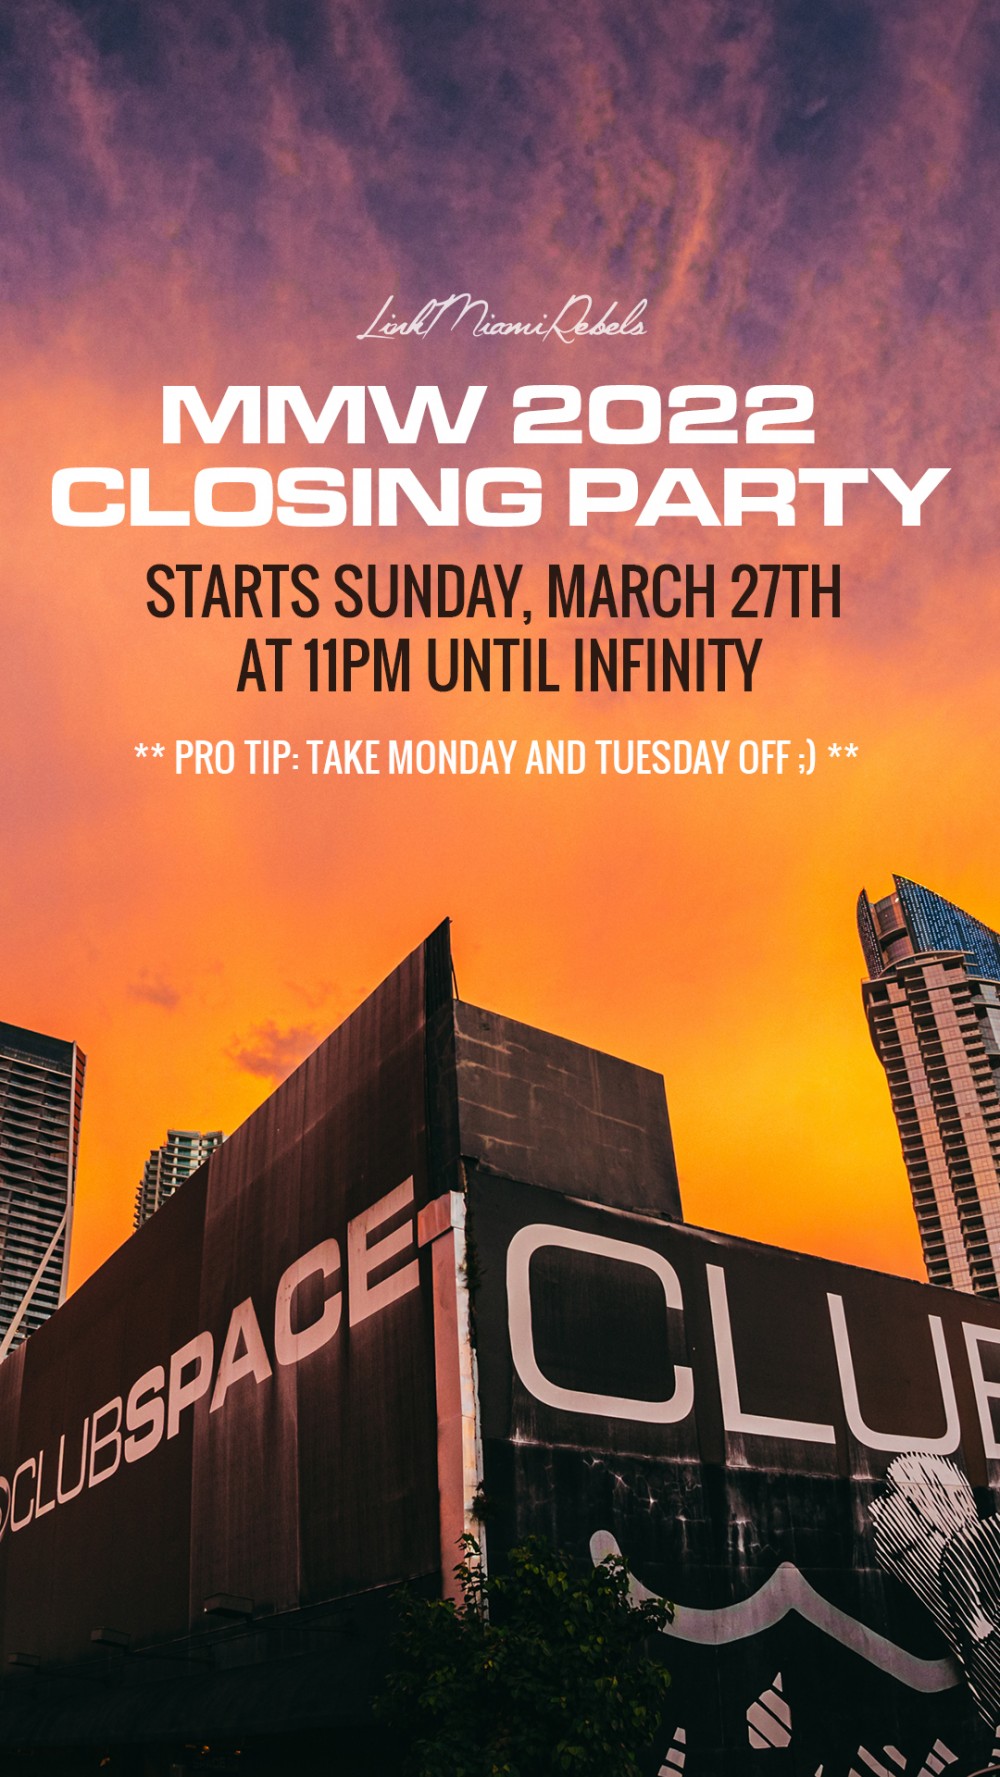 MMW Closing Party presented by Link Miami Rebels at Club Space Miami